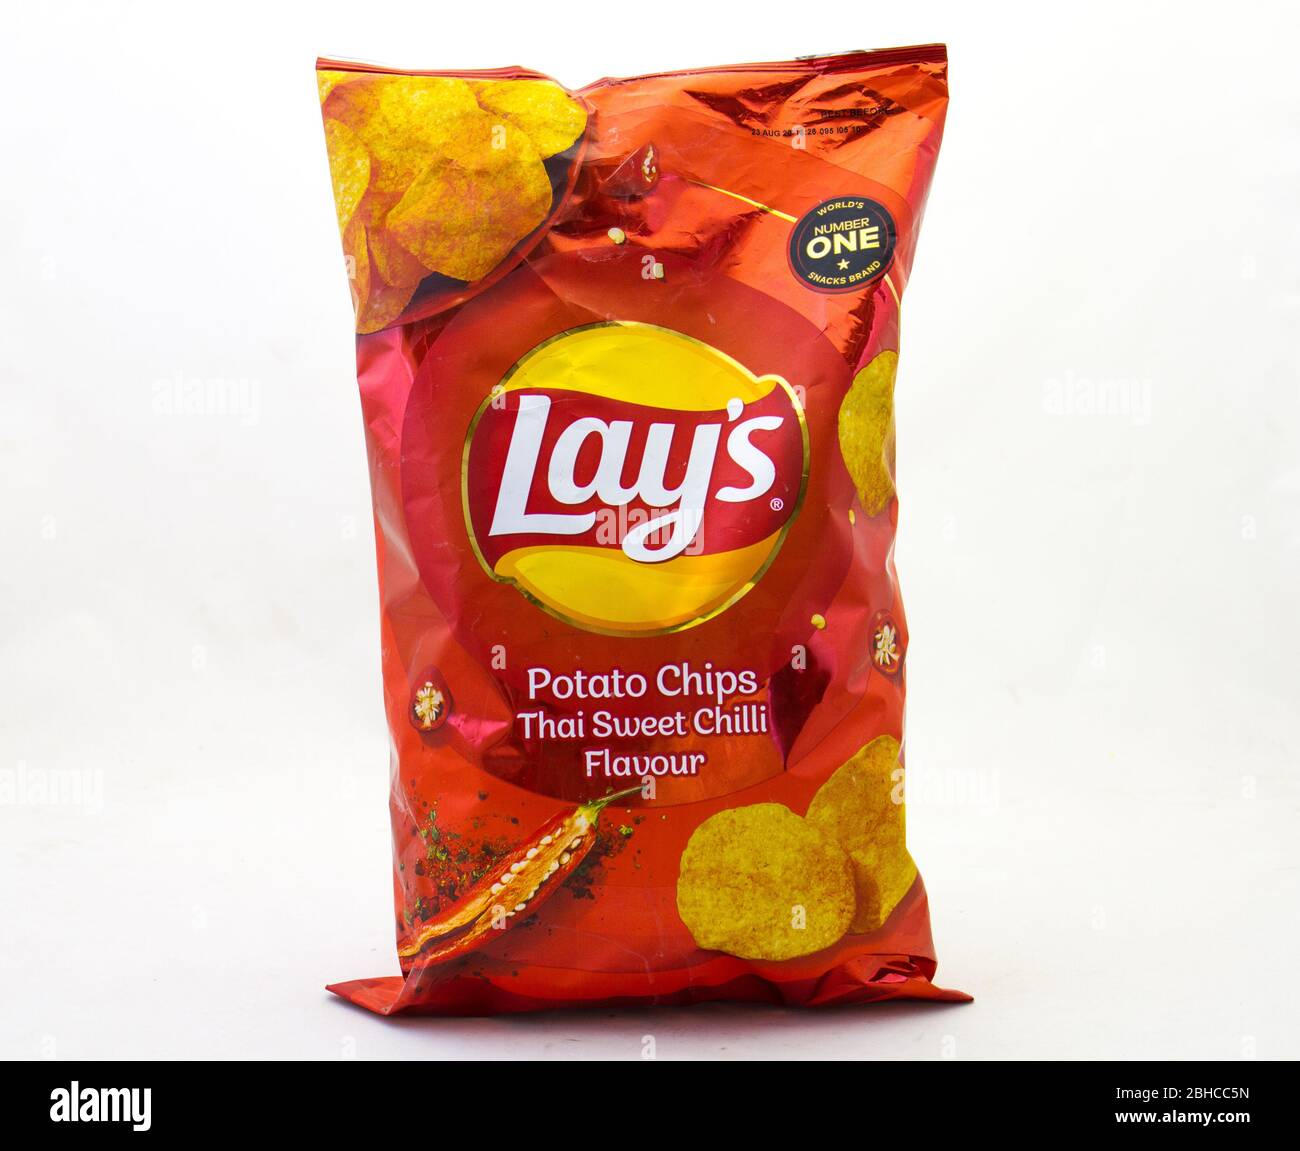 jersey royal chips